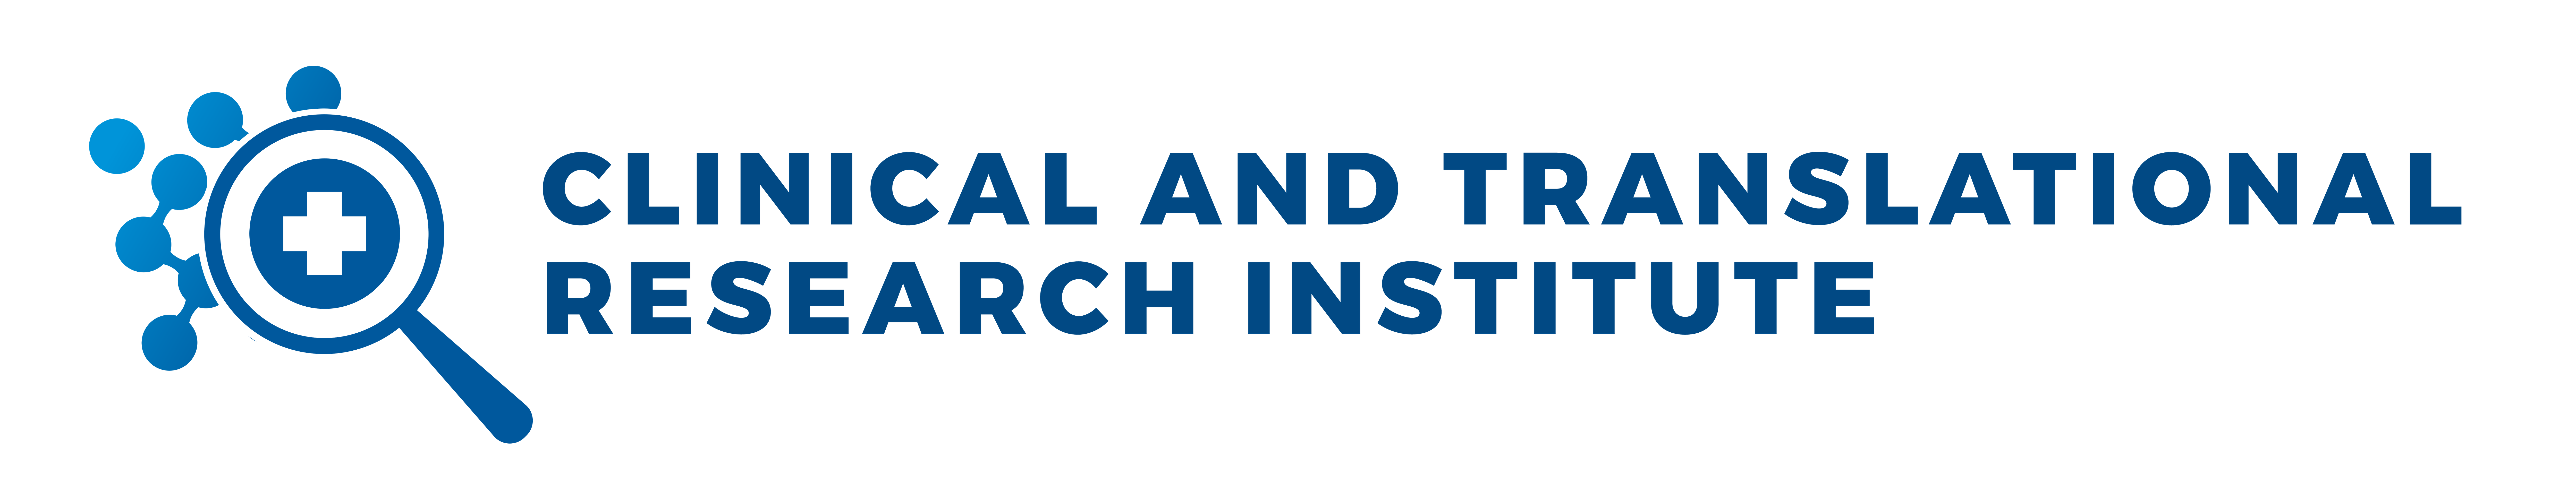 tmc clinical and translational research institute logo